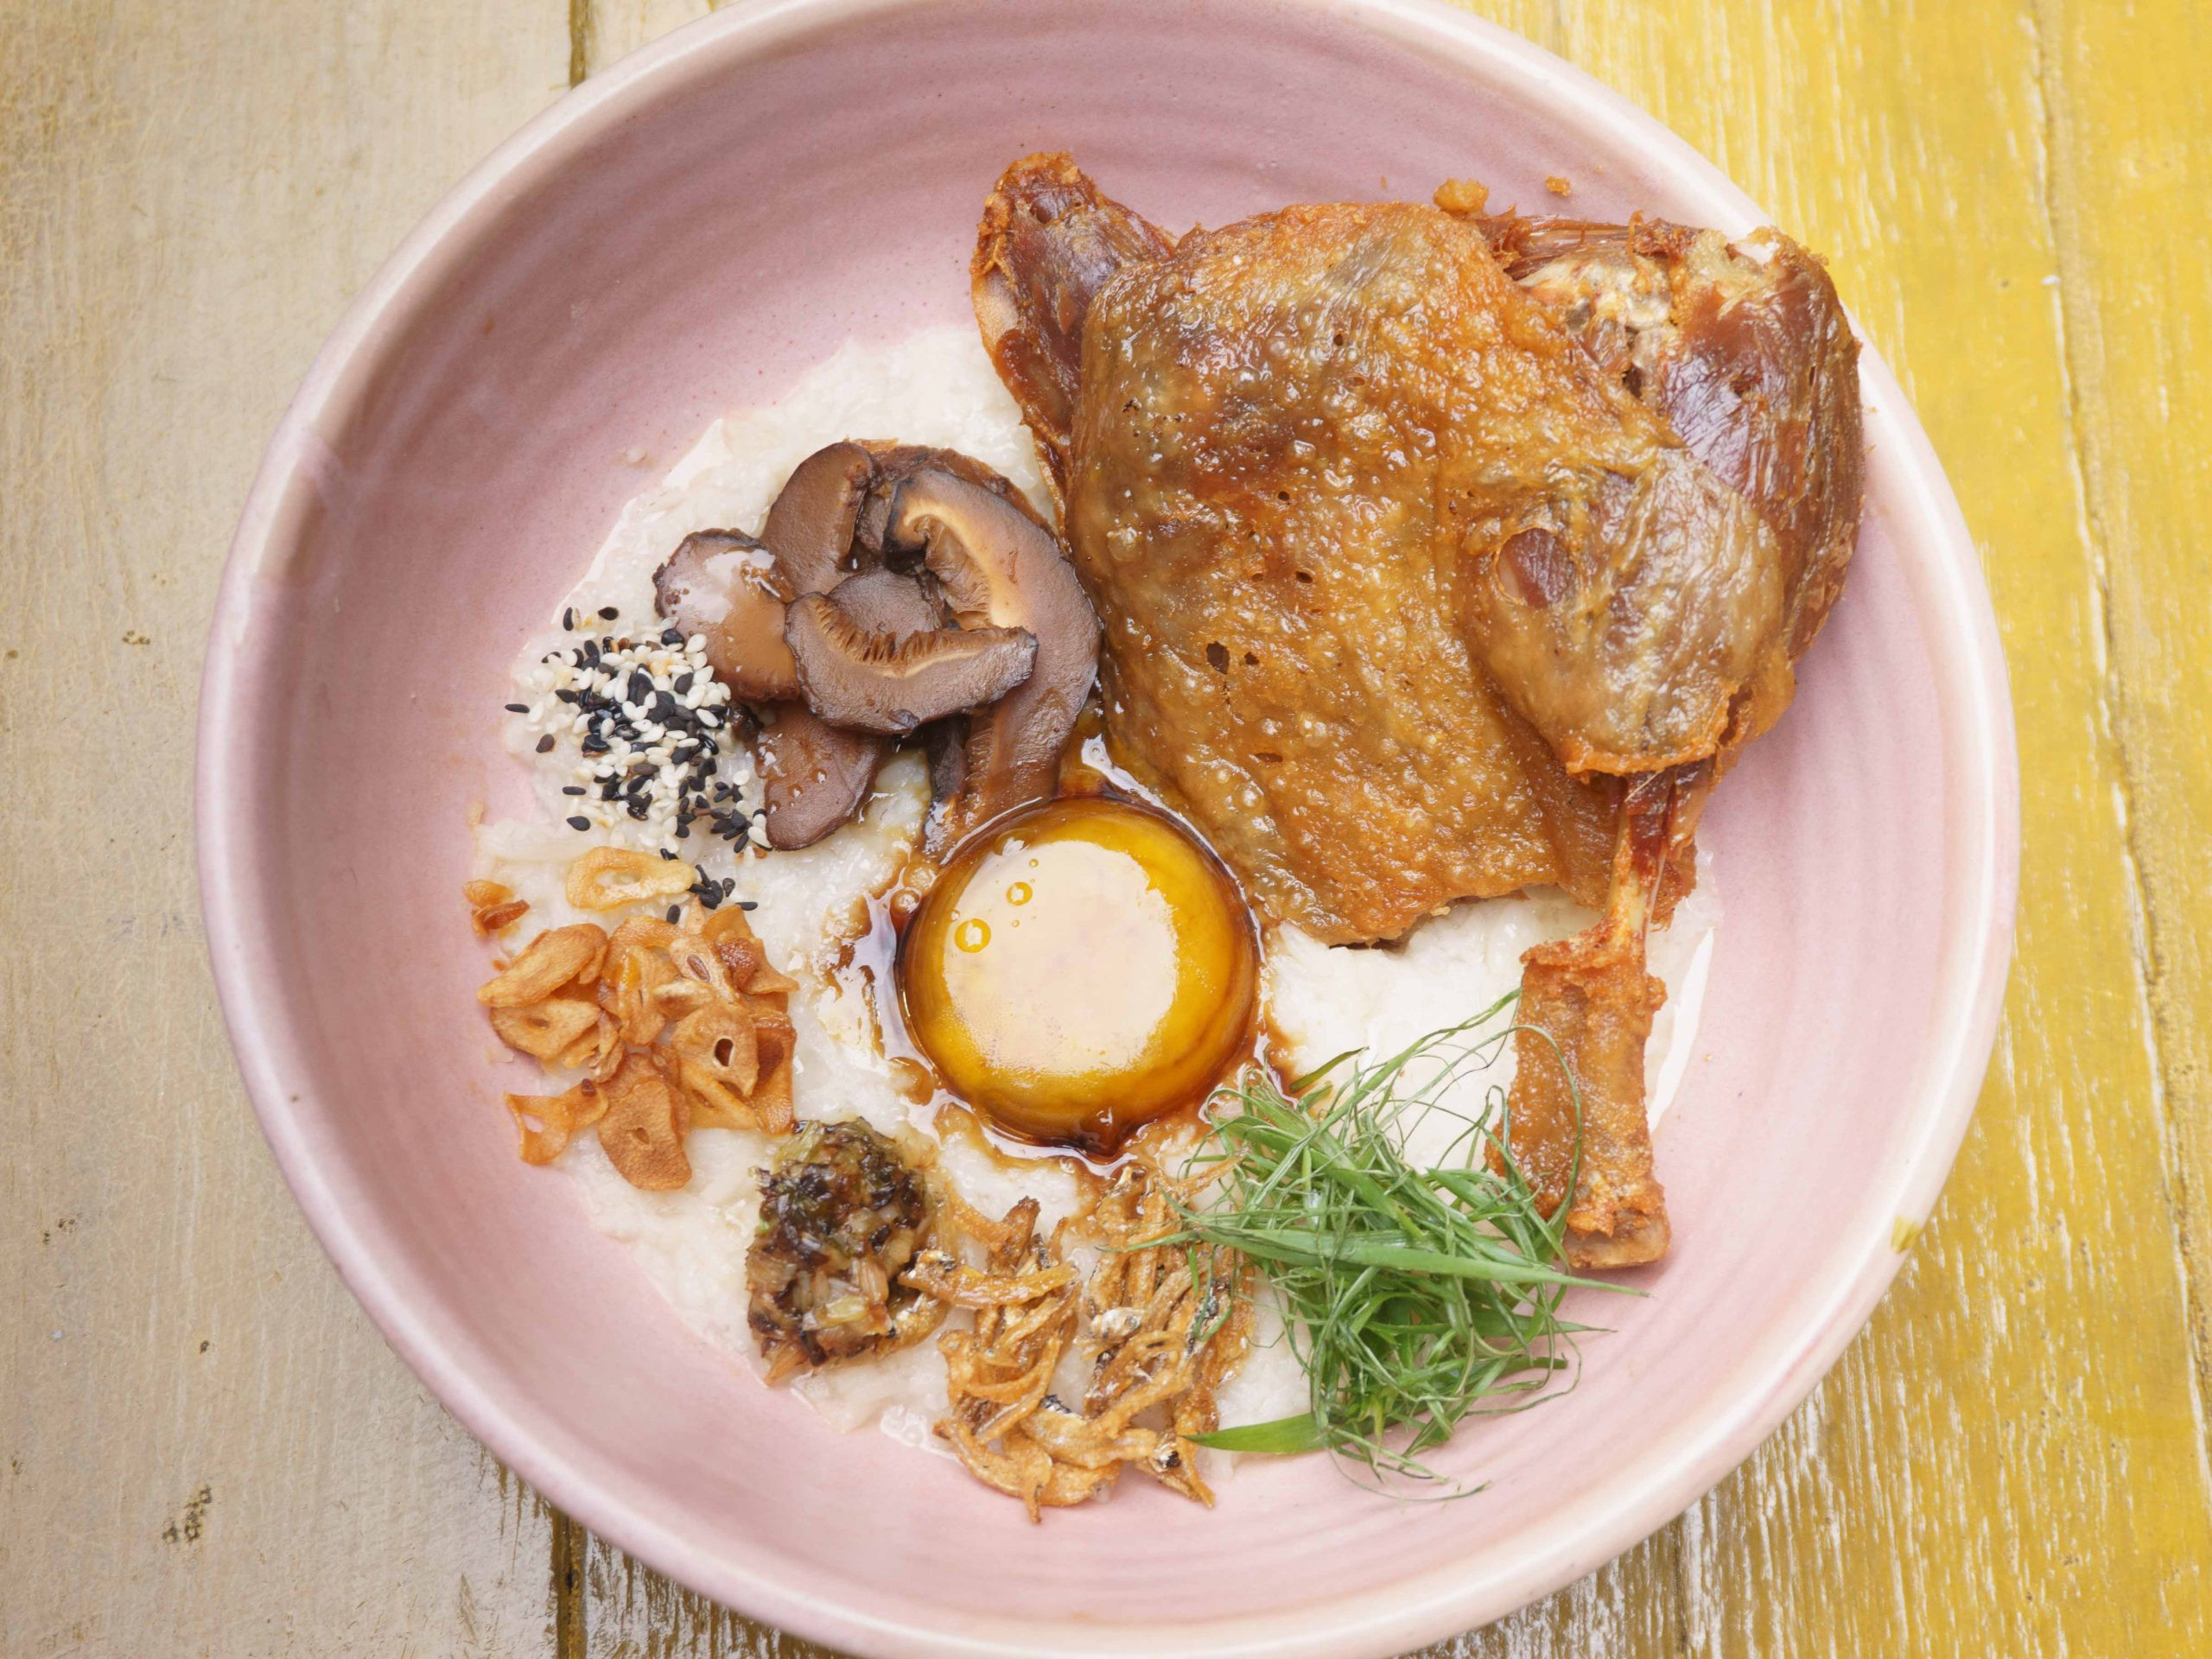 Congee with various toppings including duck confit, in a pink bowl on a wooden table.